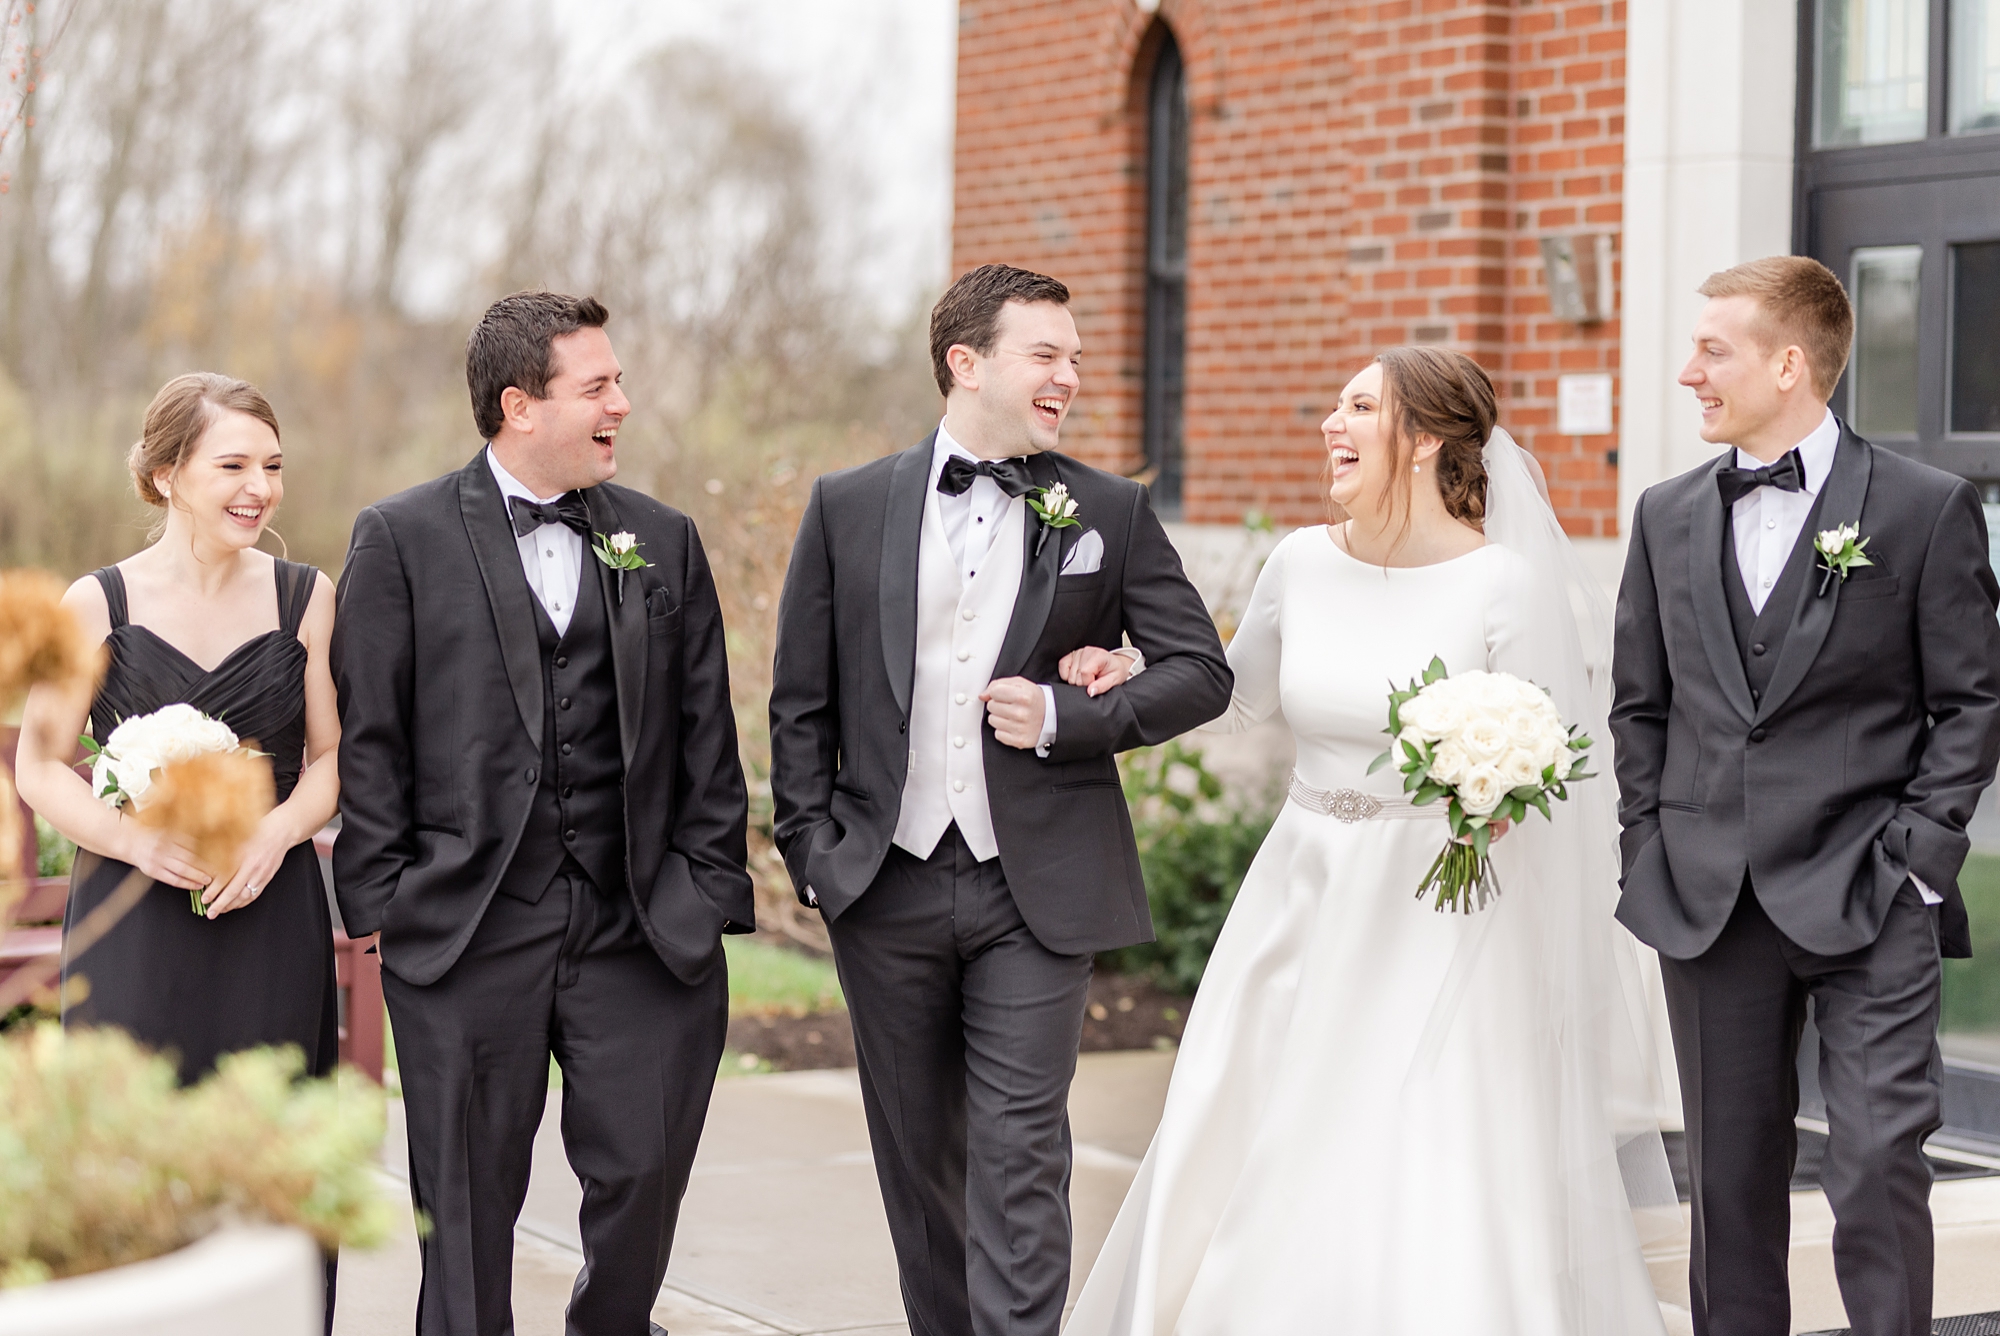 bride laughs while walking with bridesmaids and groomsmen